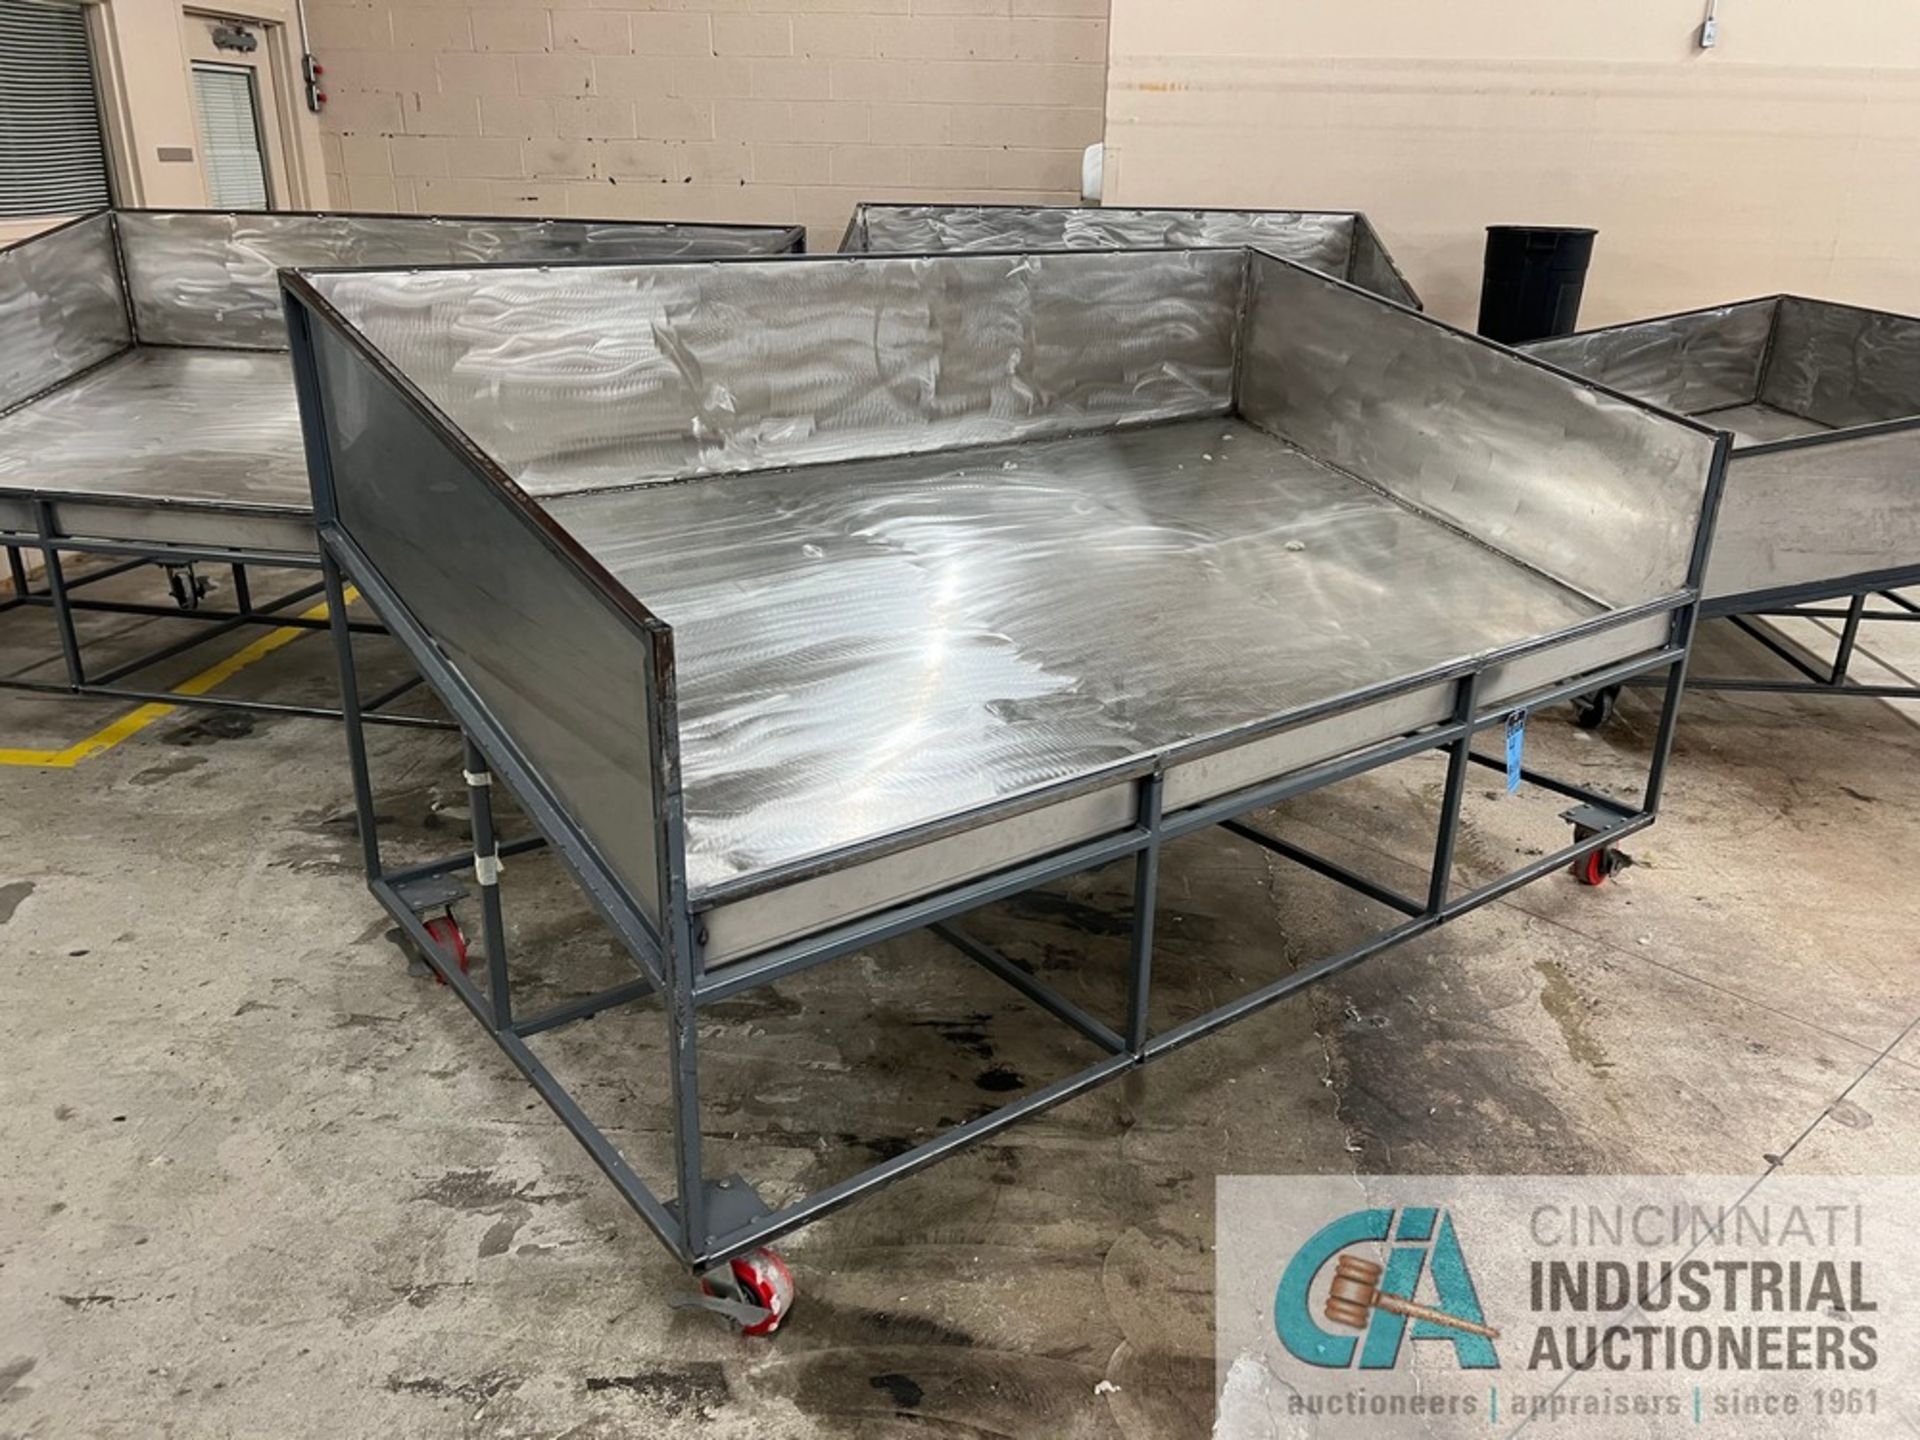 52" X 93" LONG X 17" HIGH STAINLESS STEEL TUB STEEL FRAME SORTING CART, 54" OVERALL HEIGHT - Image 2 of 3